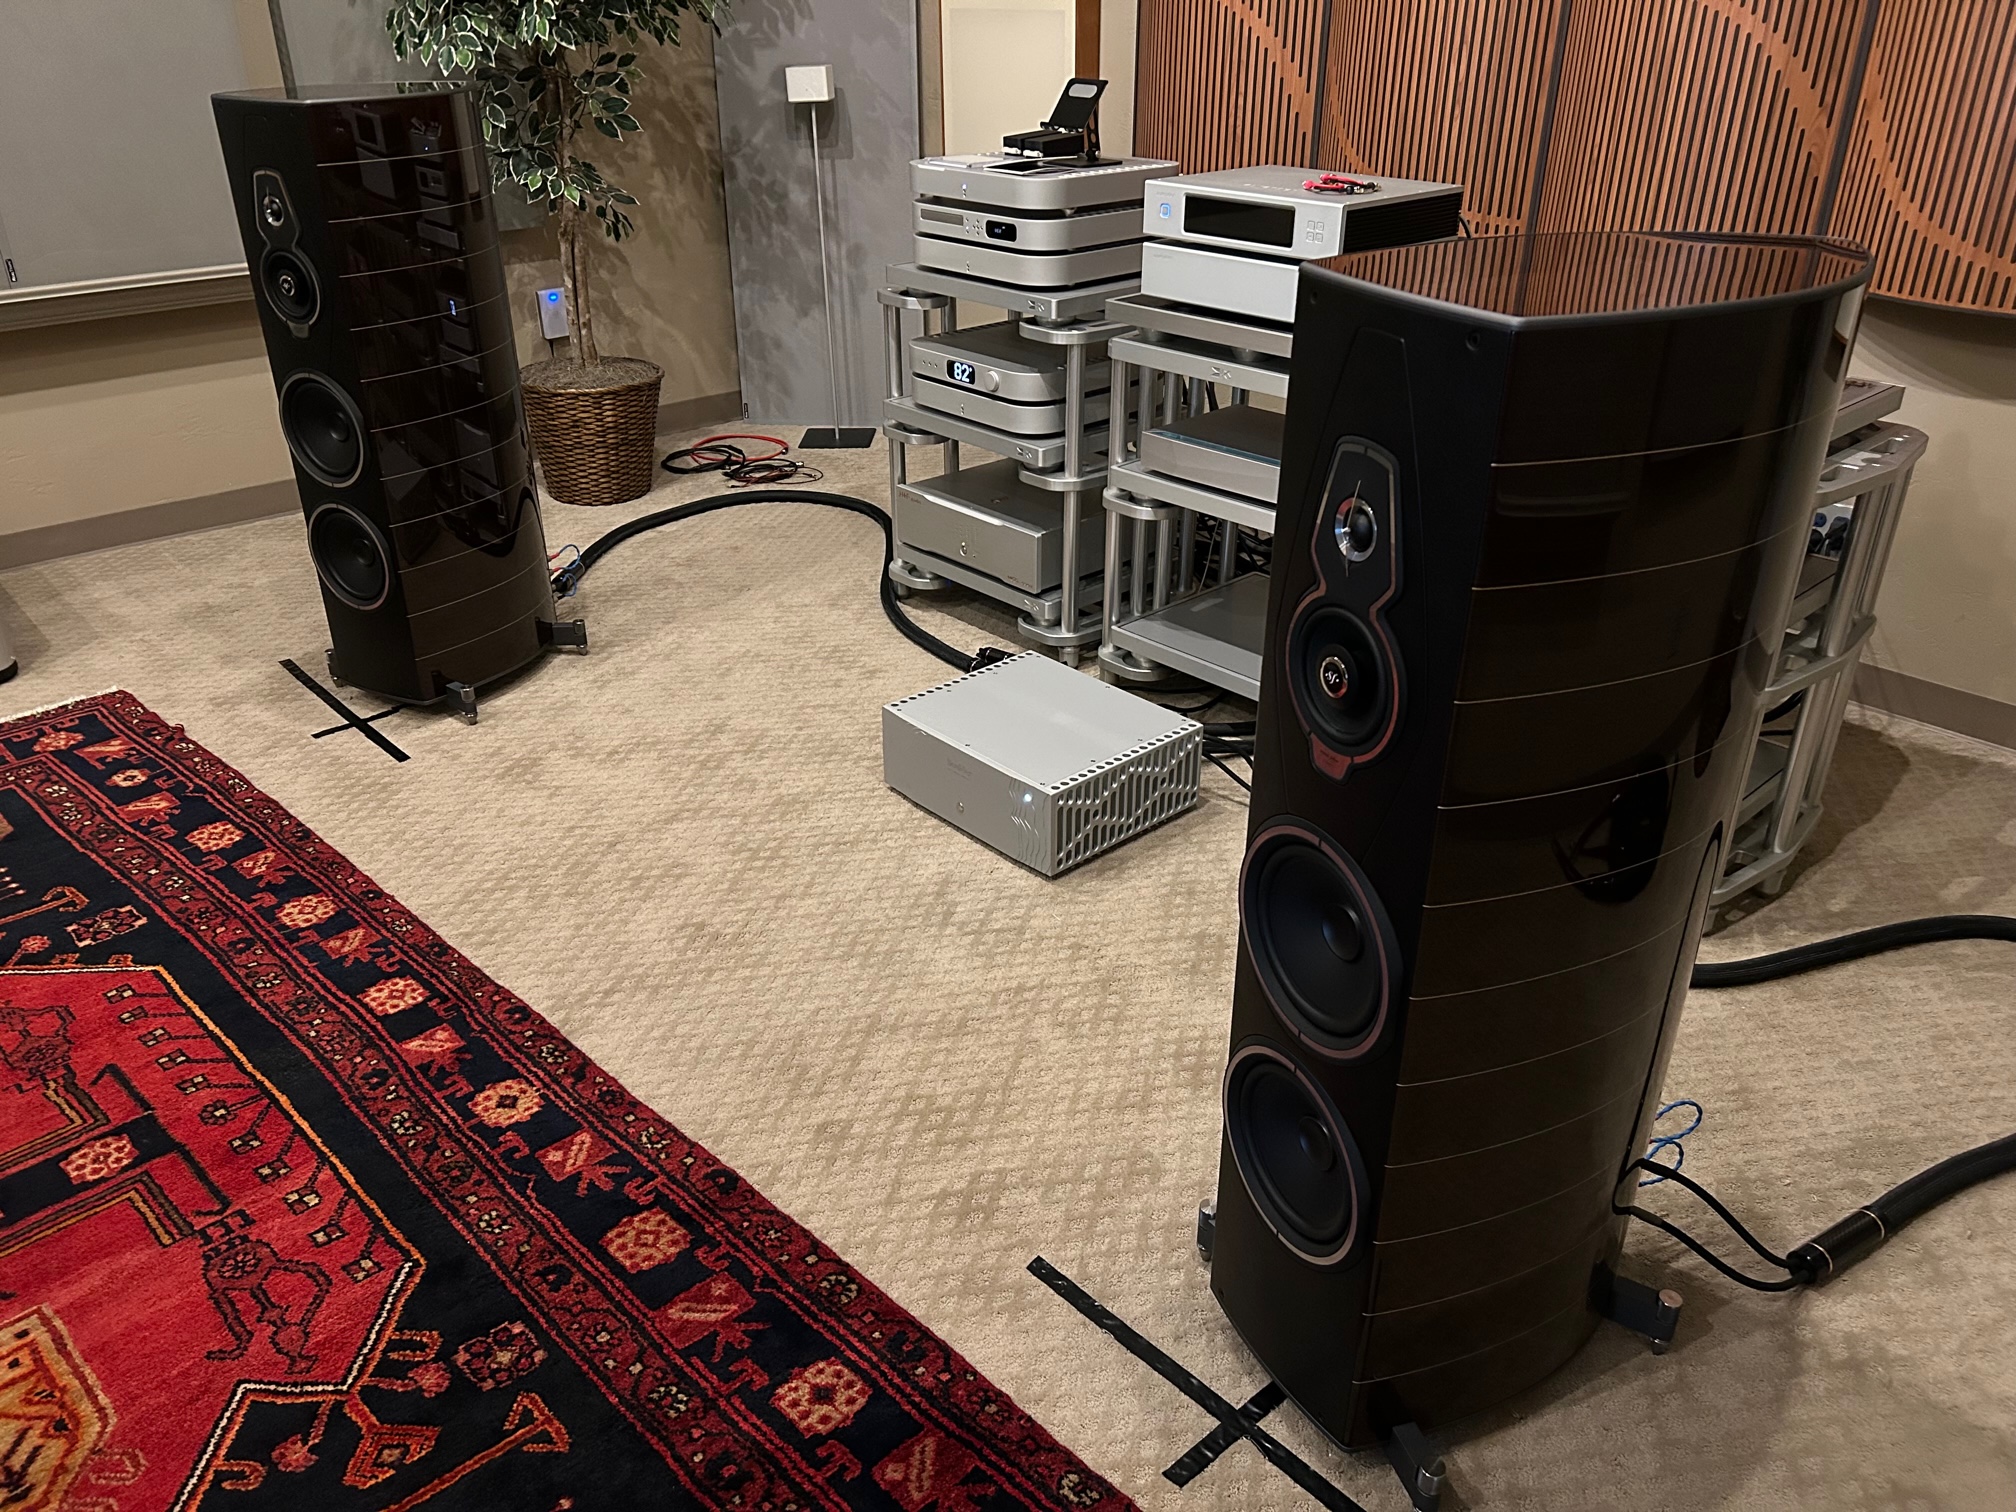 Sonus Faber Amati G5 on display - looking beautiful and sounding quite exquisite!